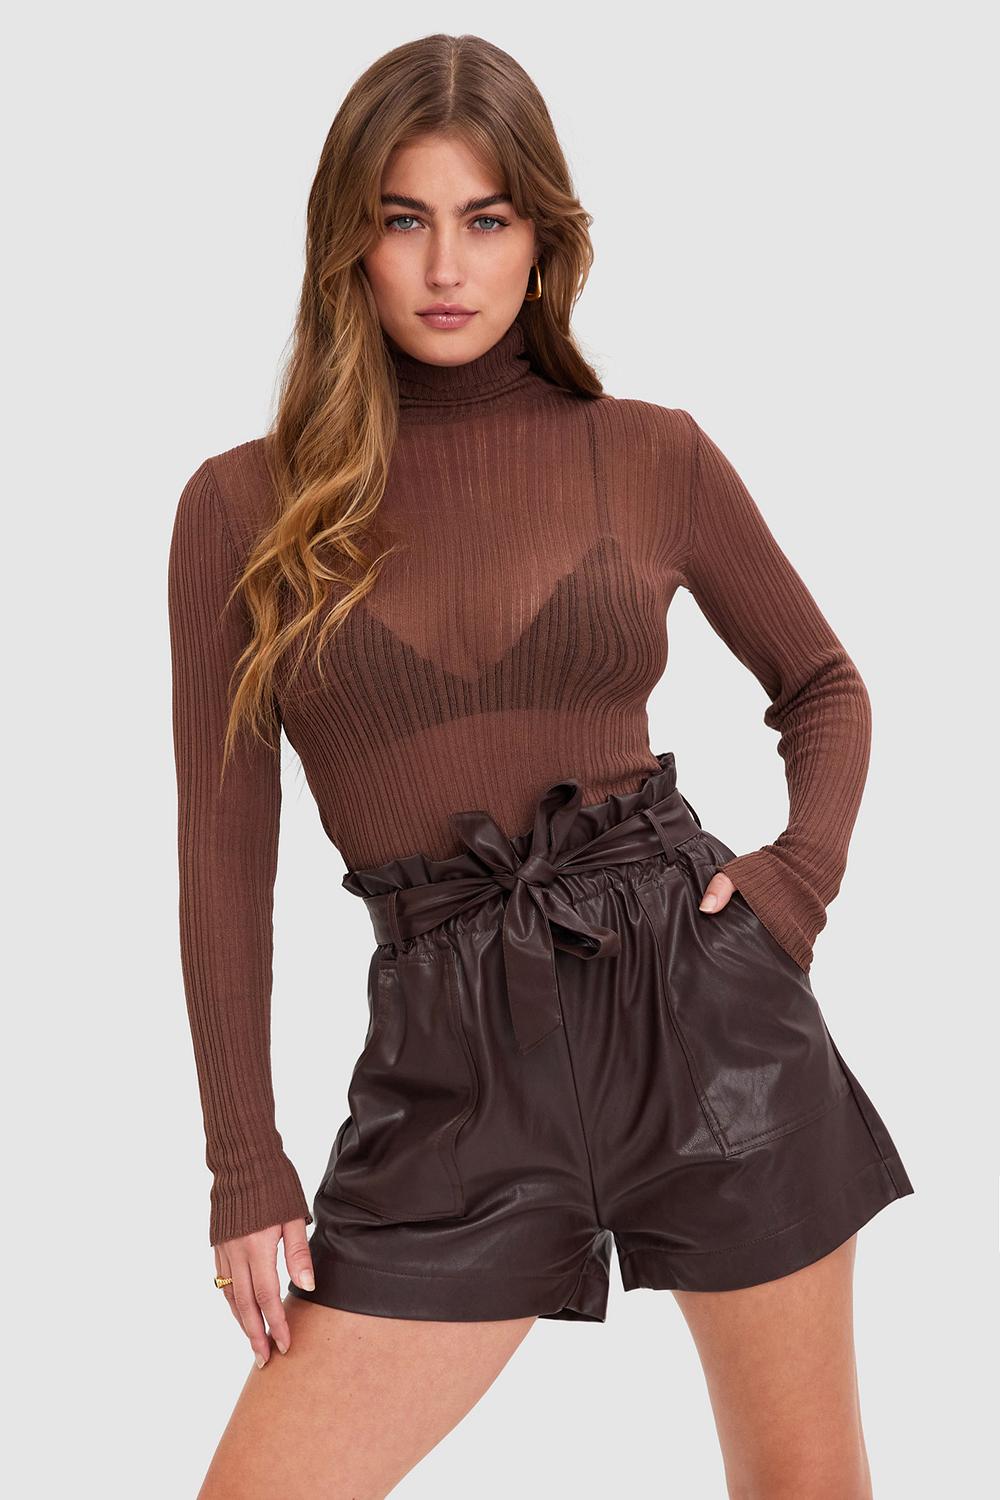 Brown PU leather short